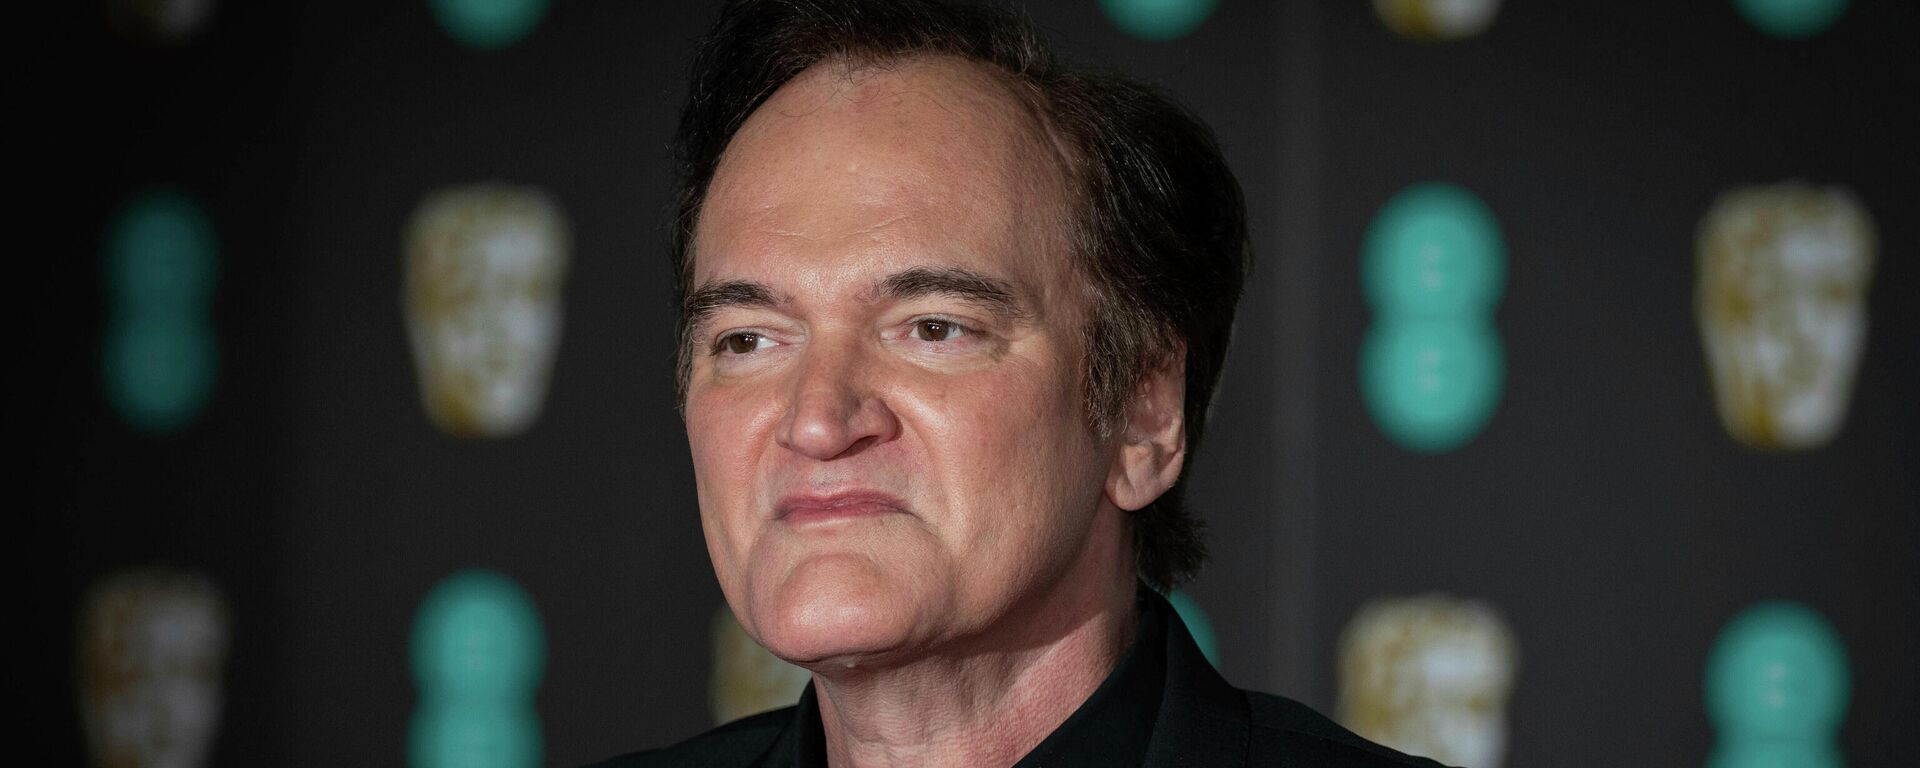 Director Quentin Tarantino poses for photographers upon arrival at the Bafta Film Awards, in central London, Sunday, Feb. 2 2020. - Sputnik International, 1920, 17.11.2021